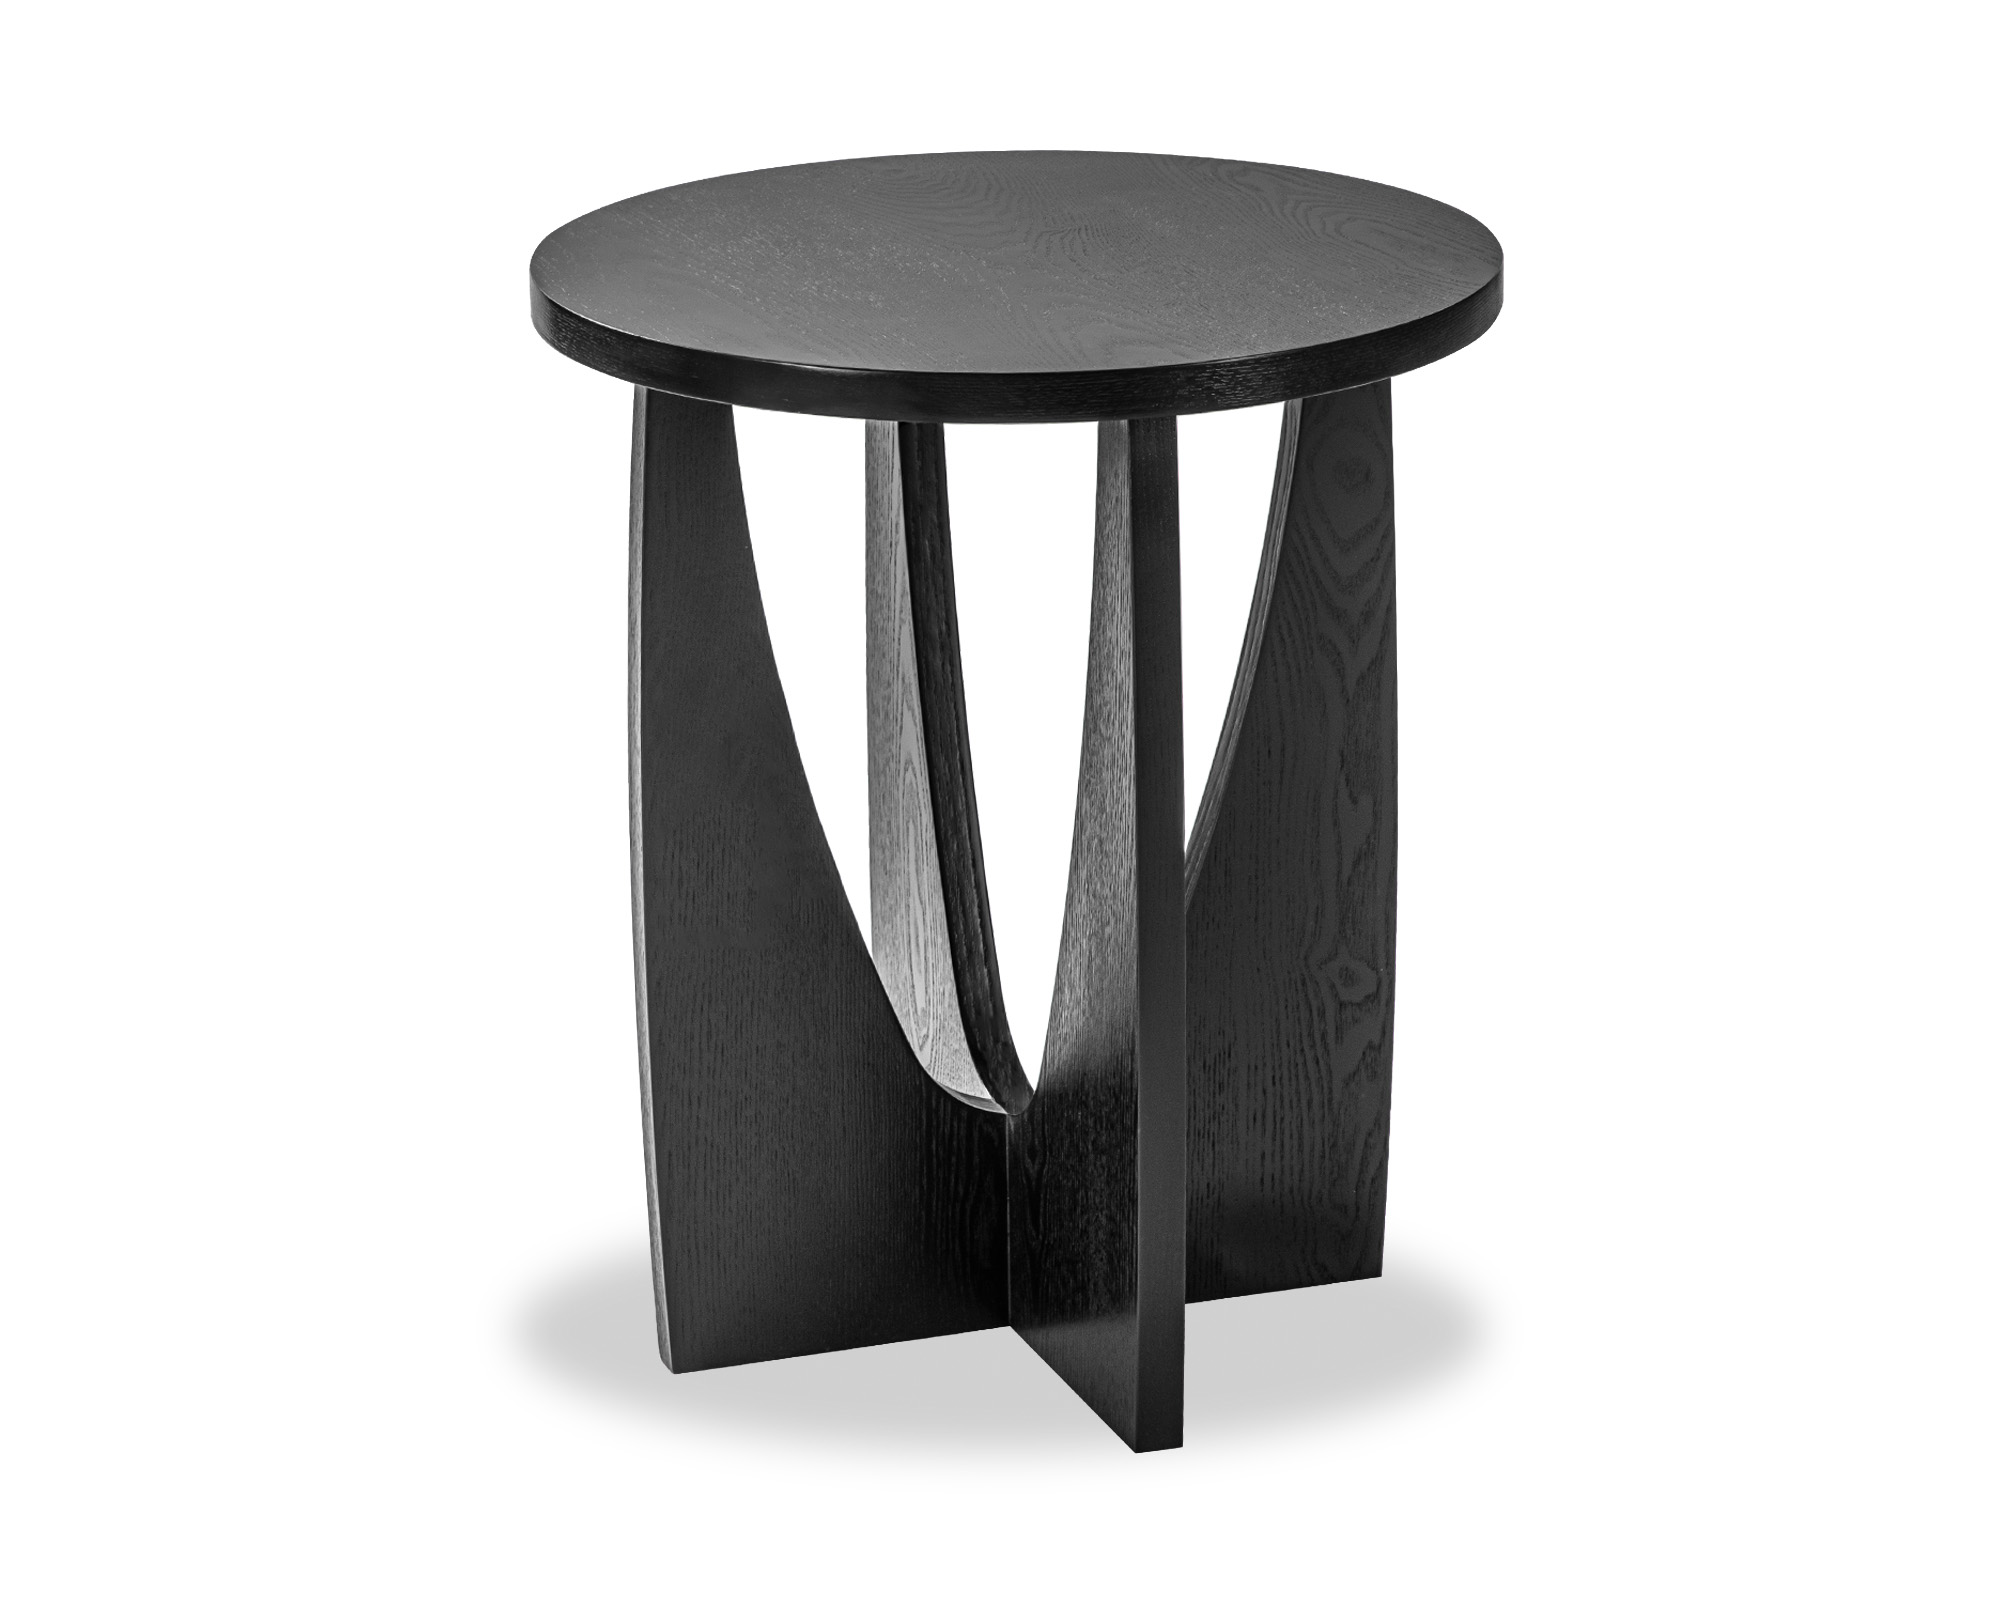 Liang & Eimil Borne side table in black ash